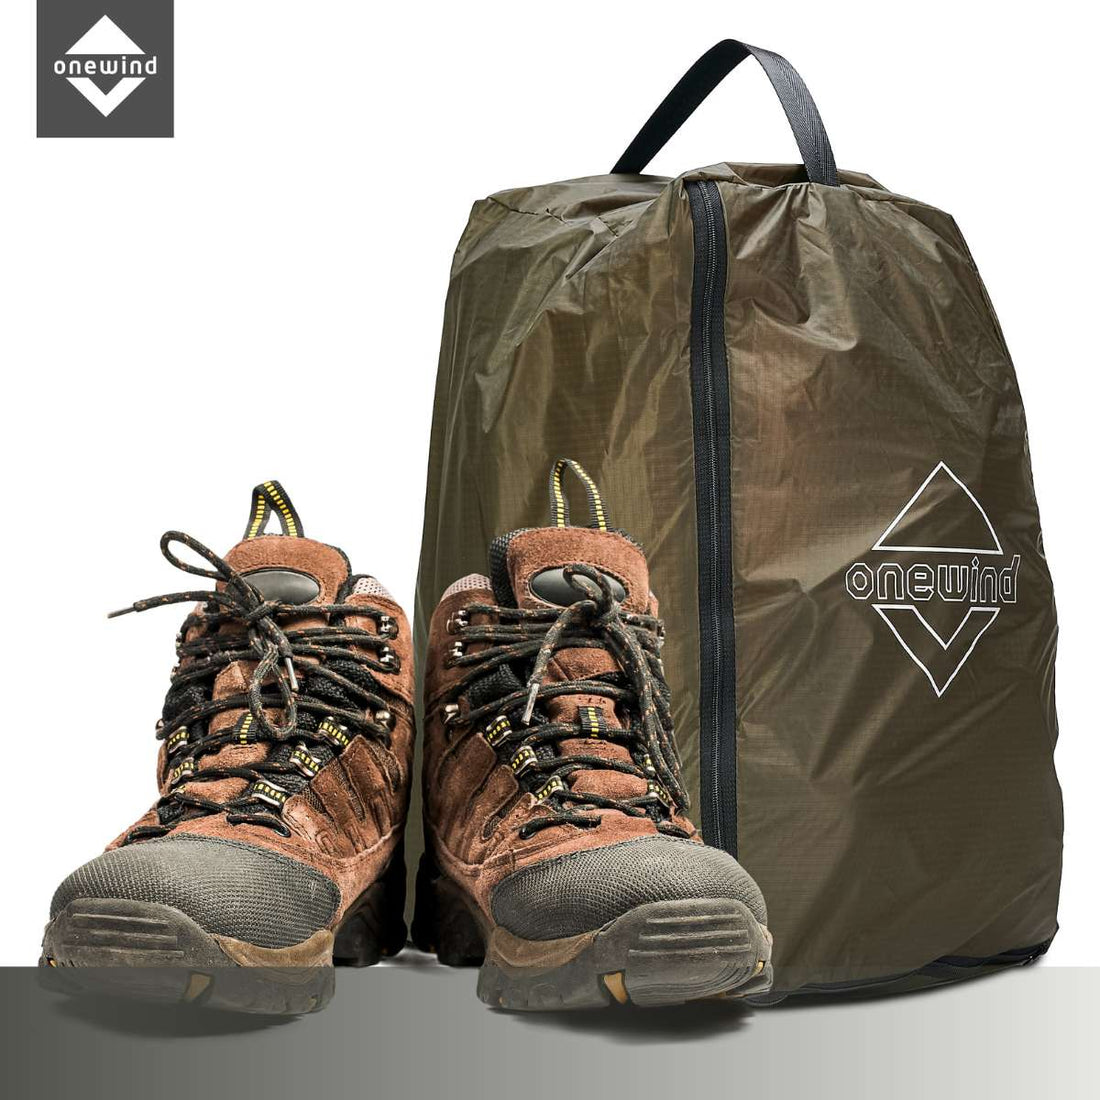 Boots Sack for Camping | Onewind Outdoors